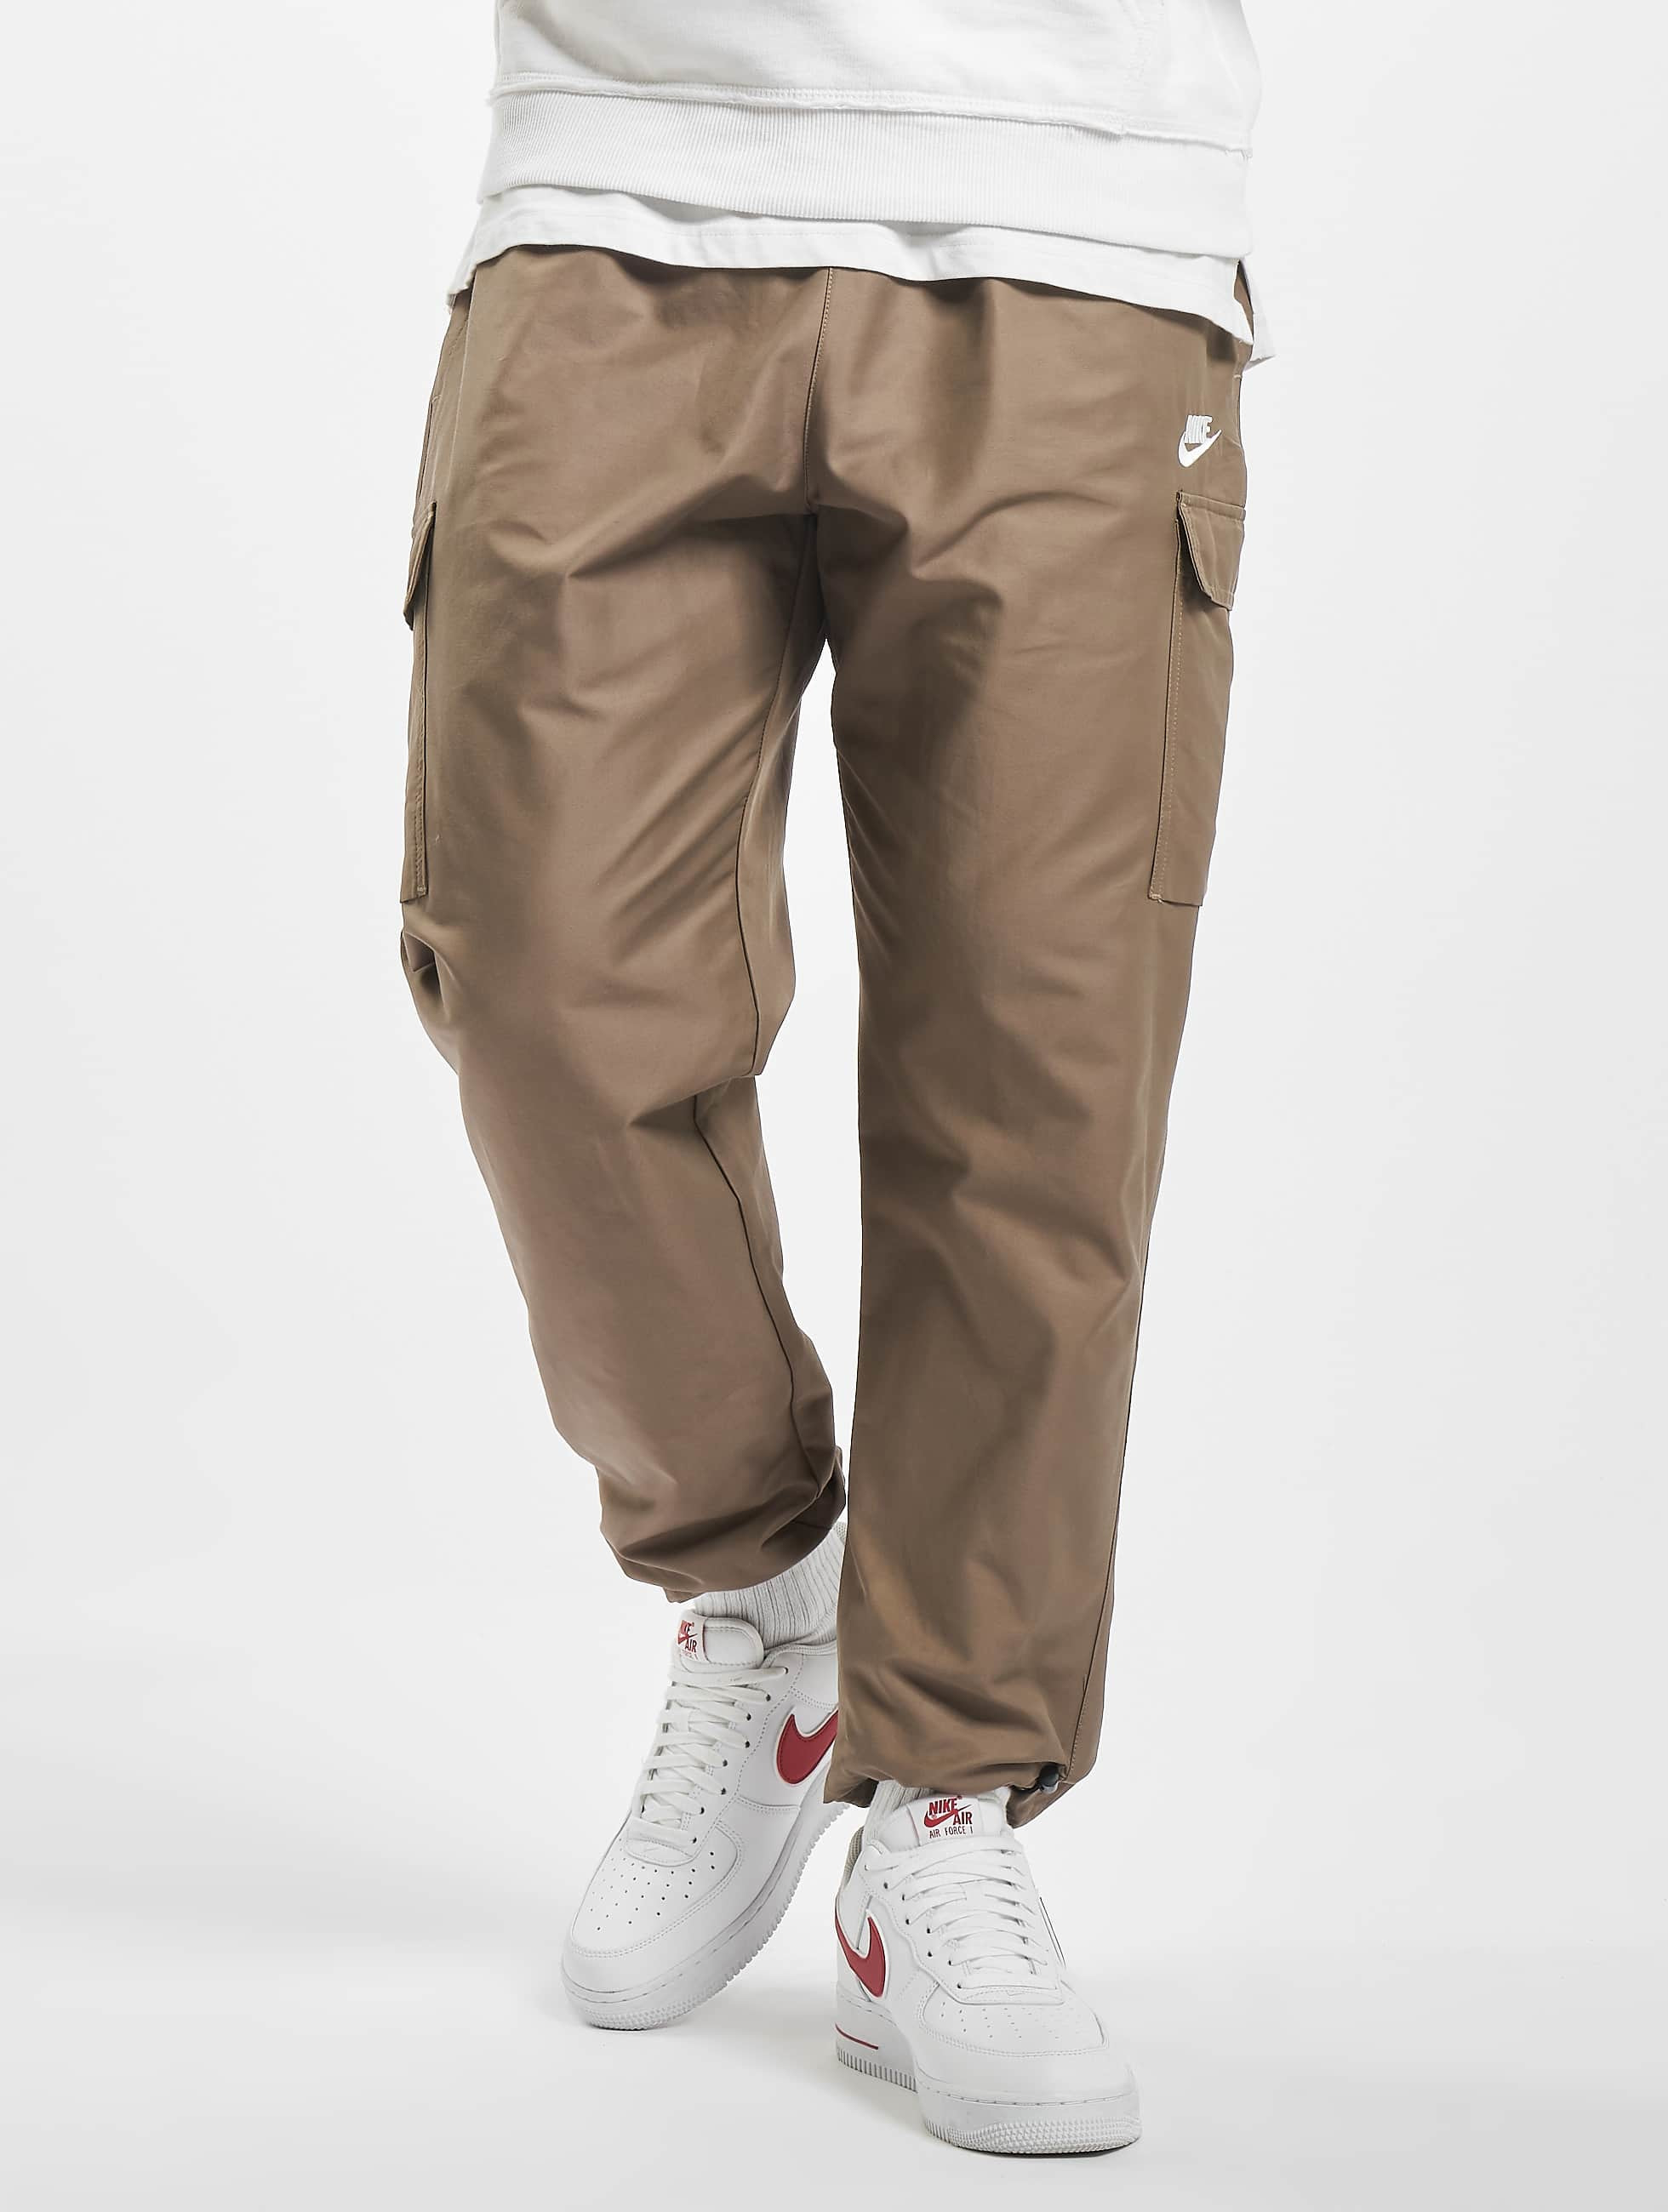 nike players woven cargo track pants